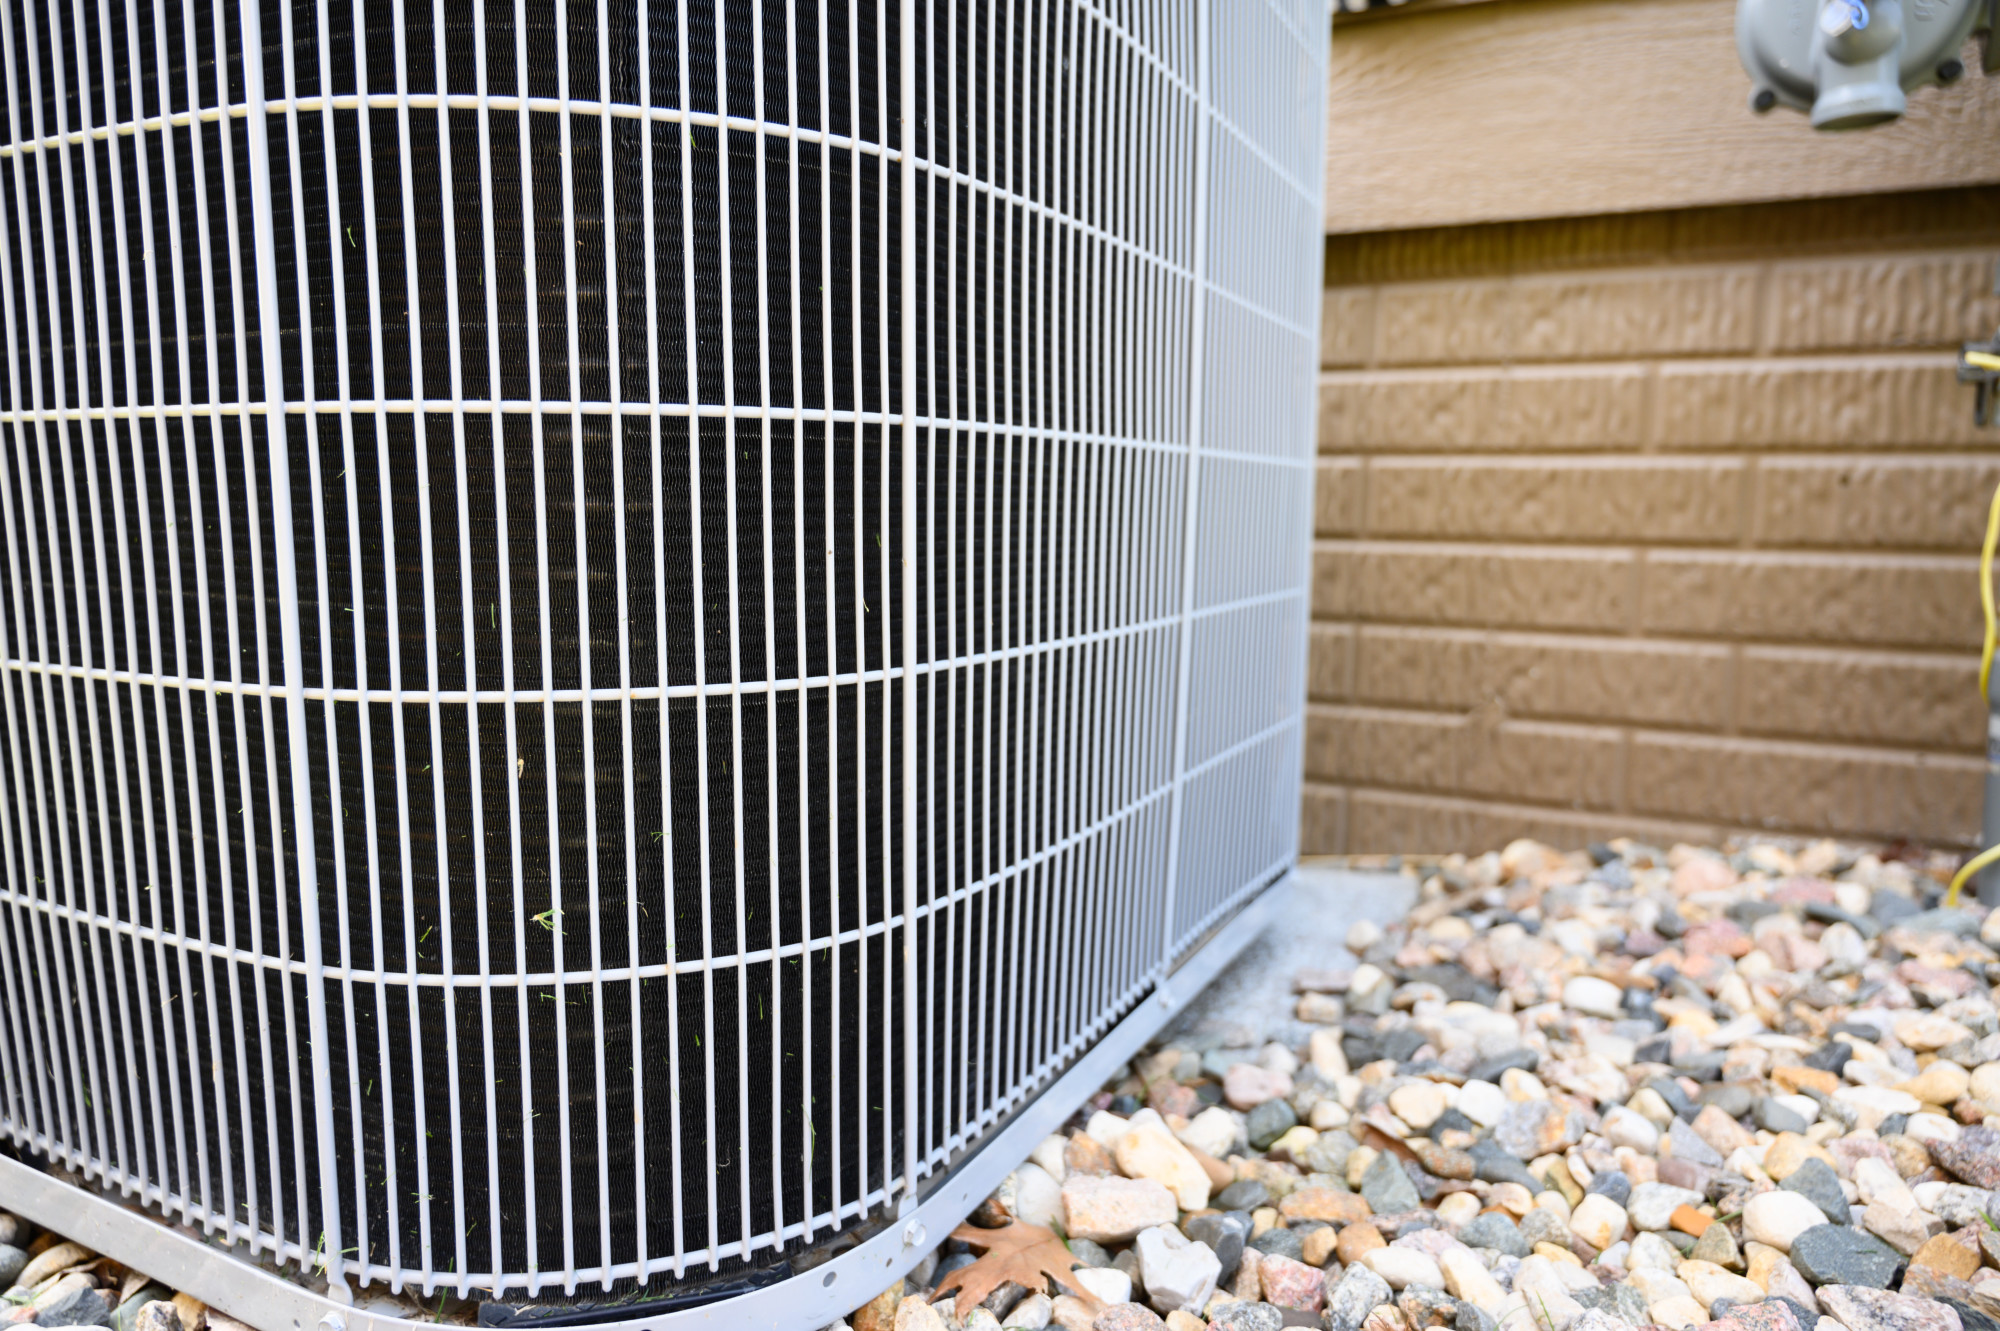 5 Common AC Issues in Katy, TX and How to Fix Them